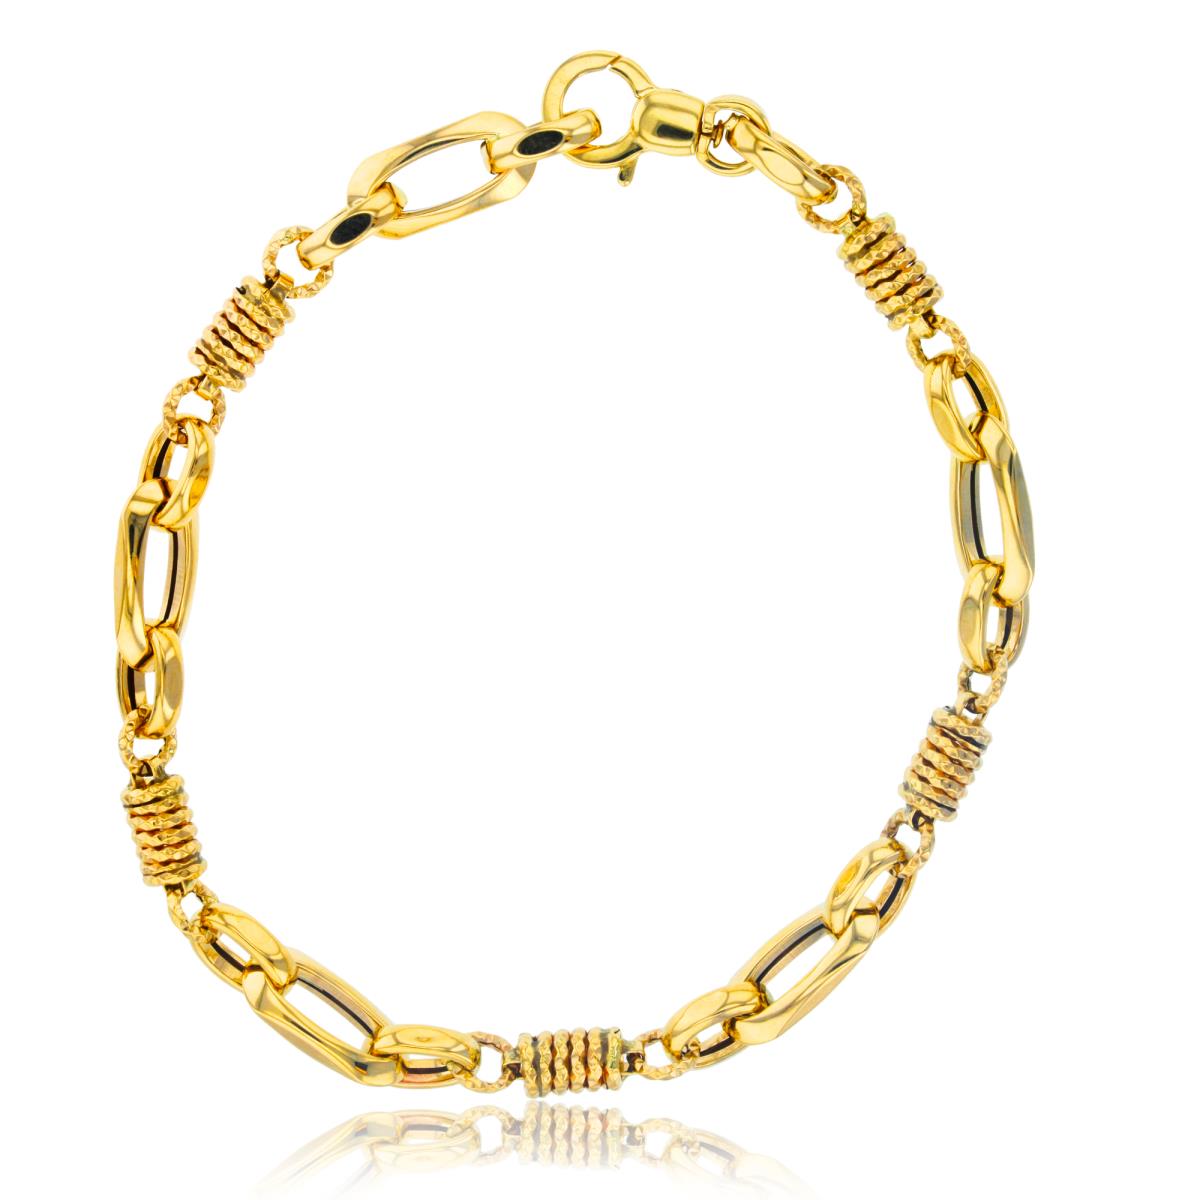 10K Yellow Gold Polished Oval Links & DC Spring 8.5" Chain Bracelet